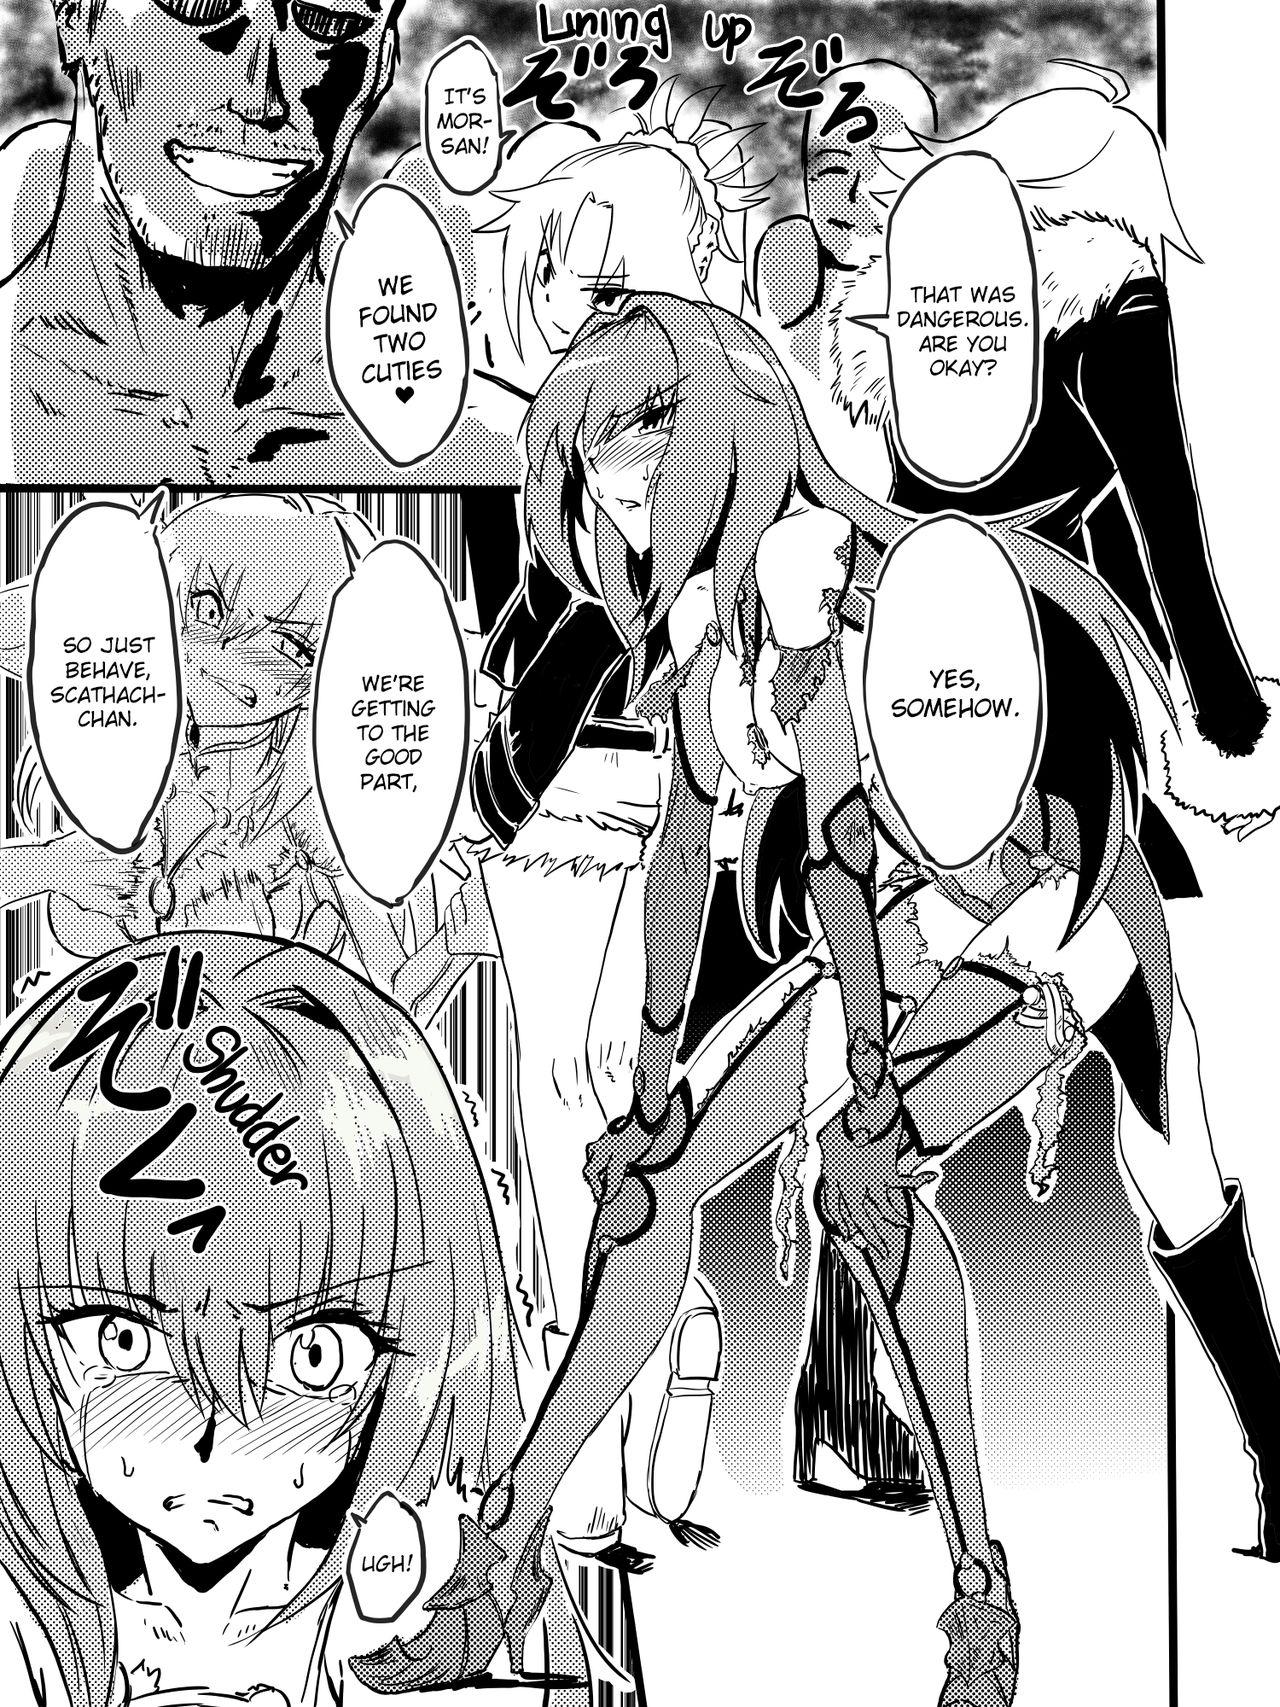 Euro Tousouchuu in Chaldea | Running away in Chaldea - Fate grand order Pool - Page 5